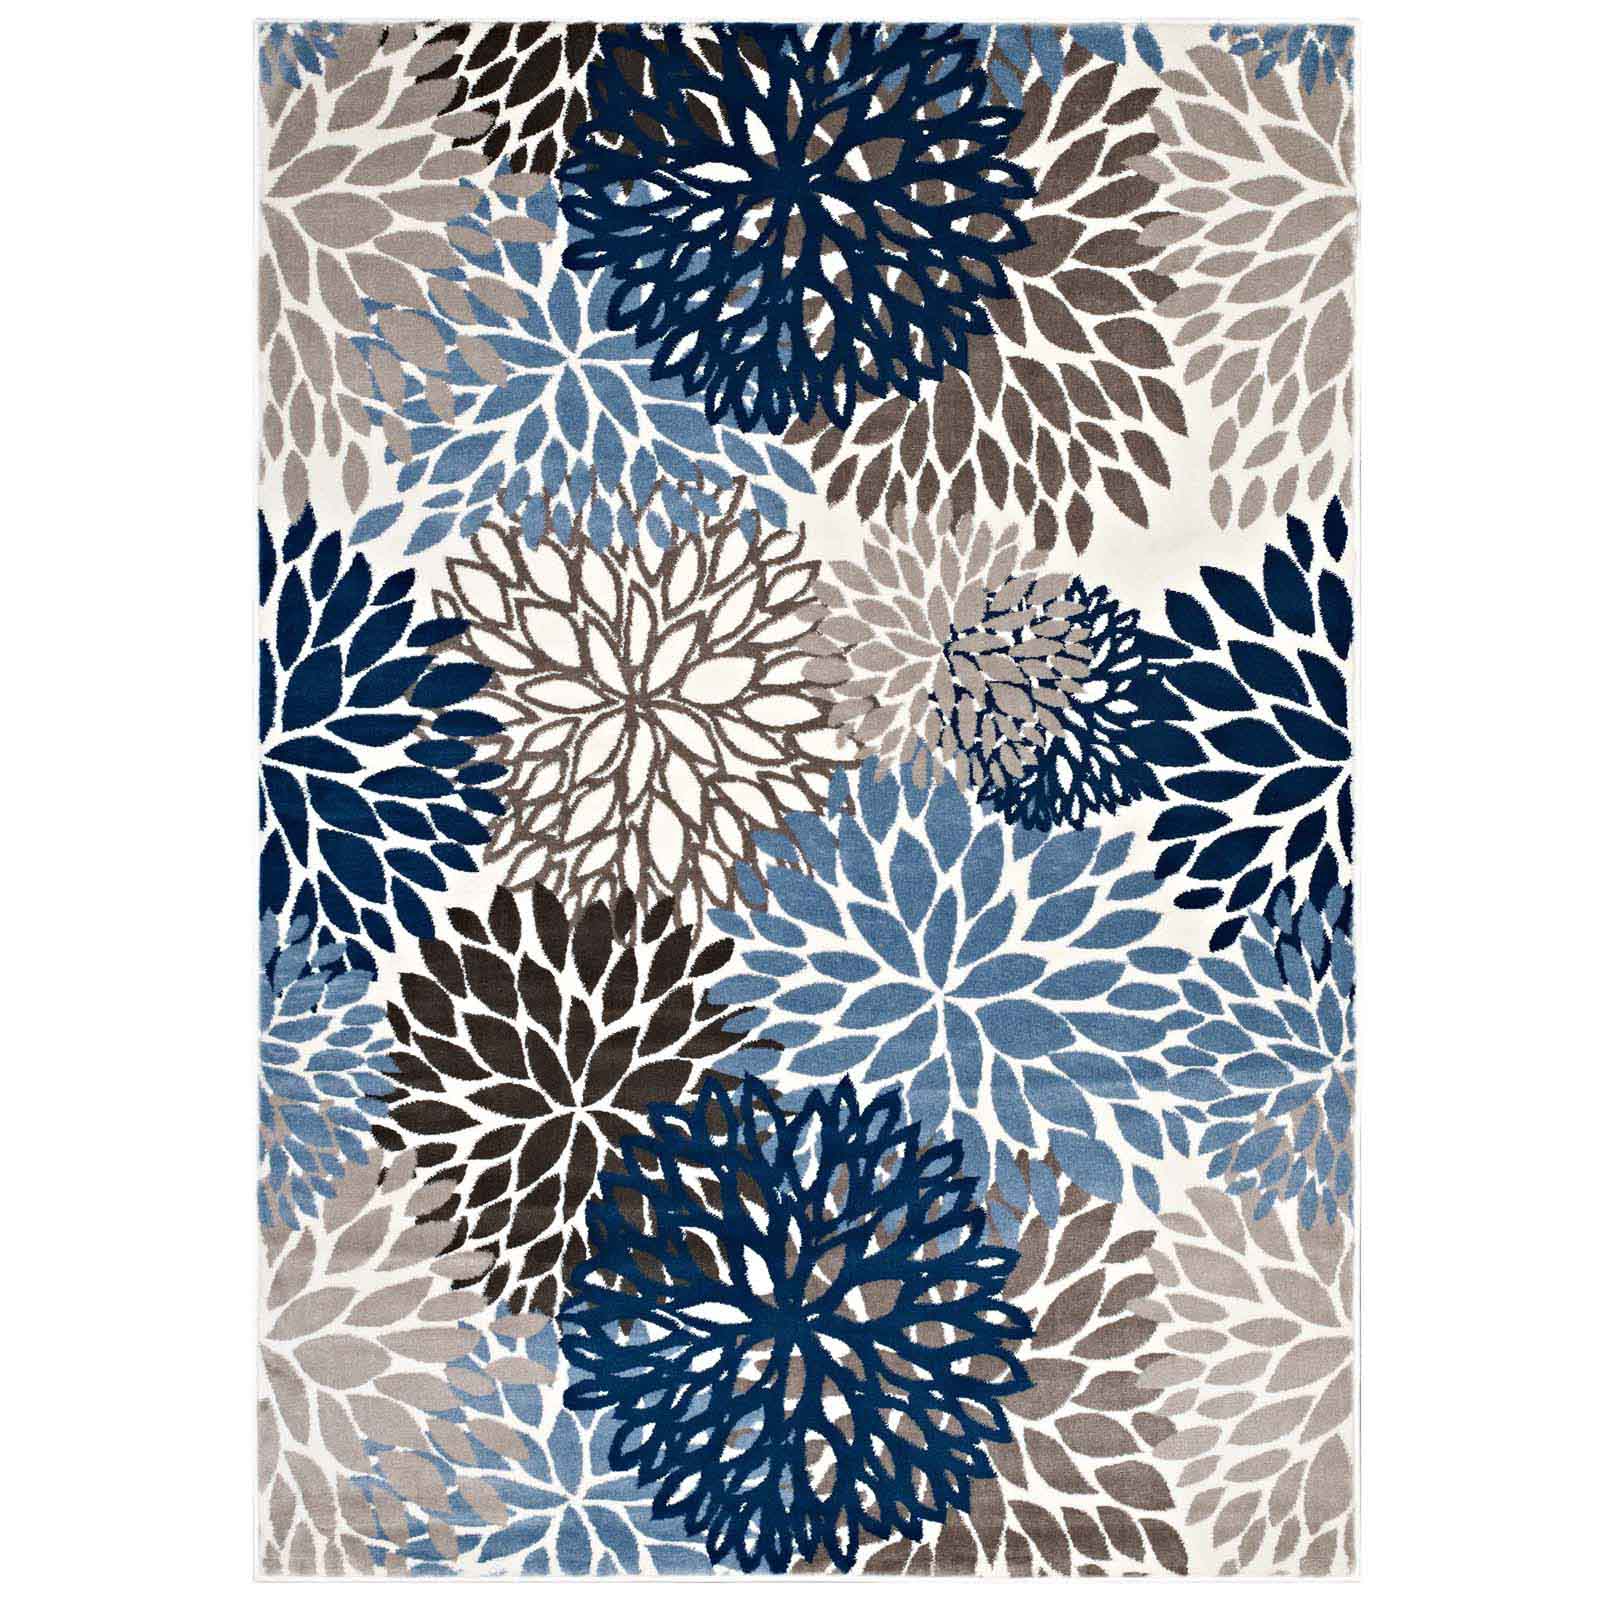 Calithea Vintage Classic Abstract Floral 8x10 Area Rug